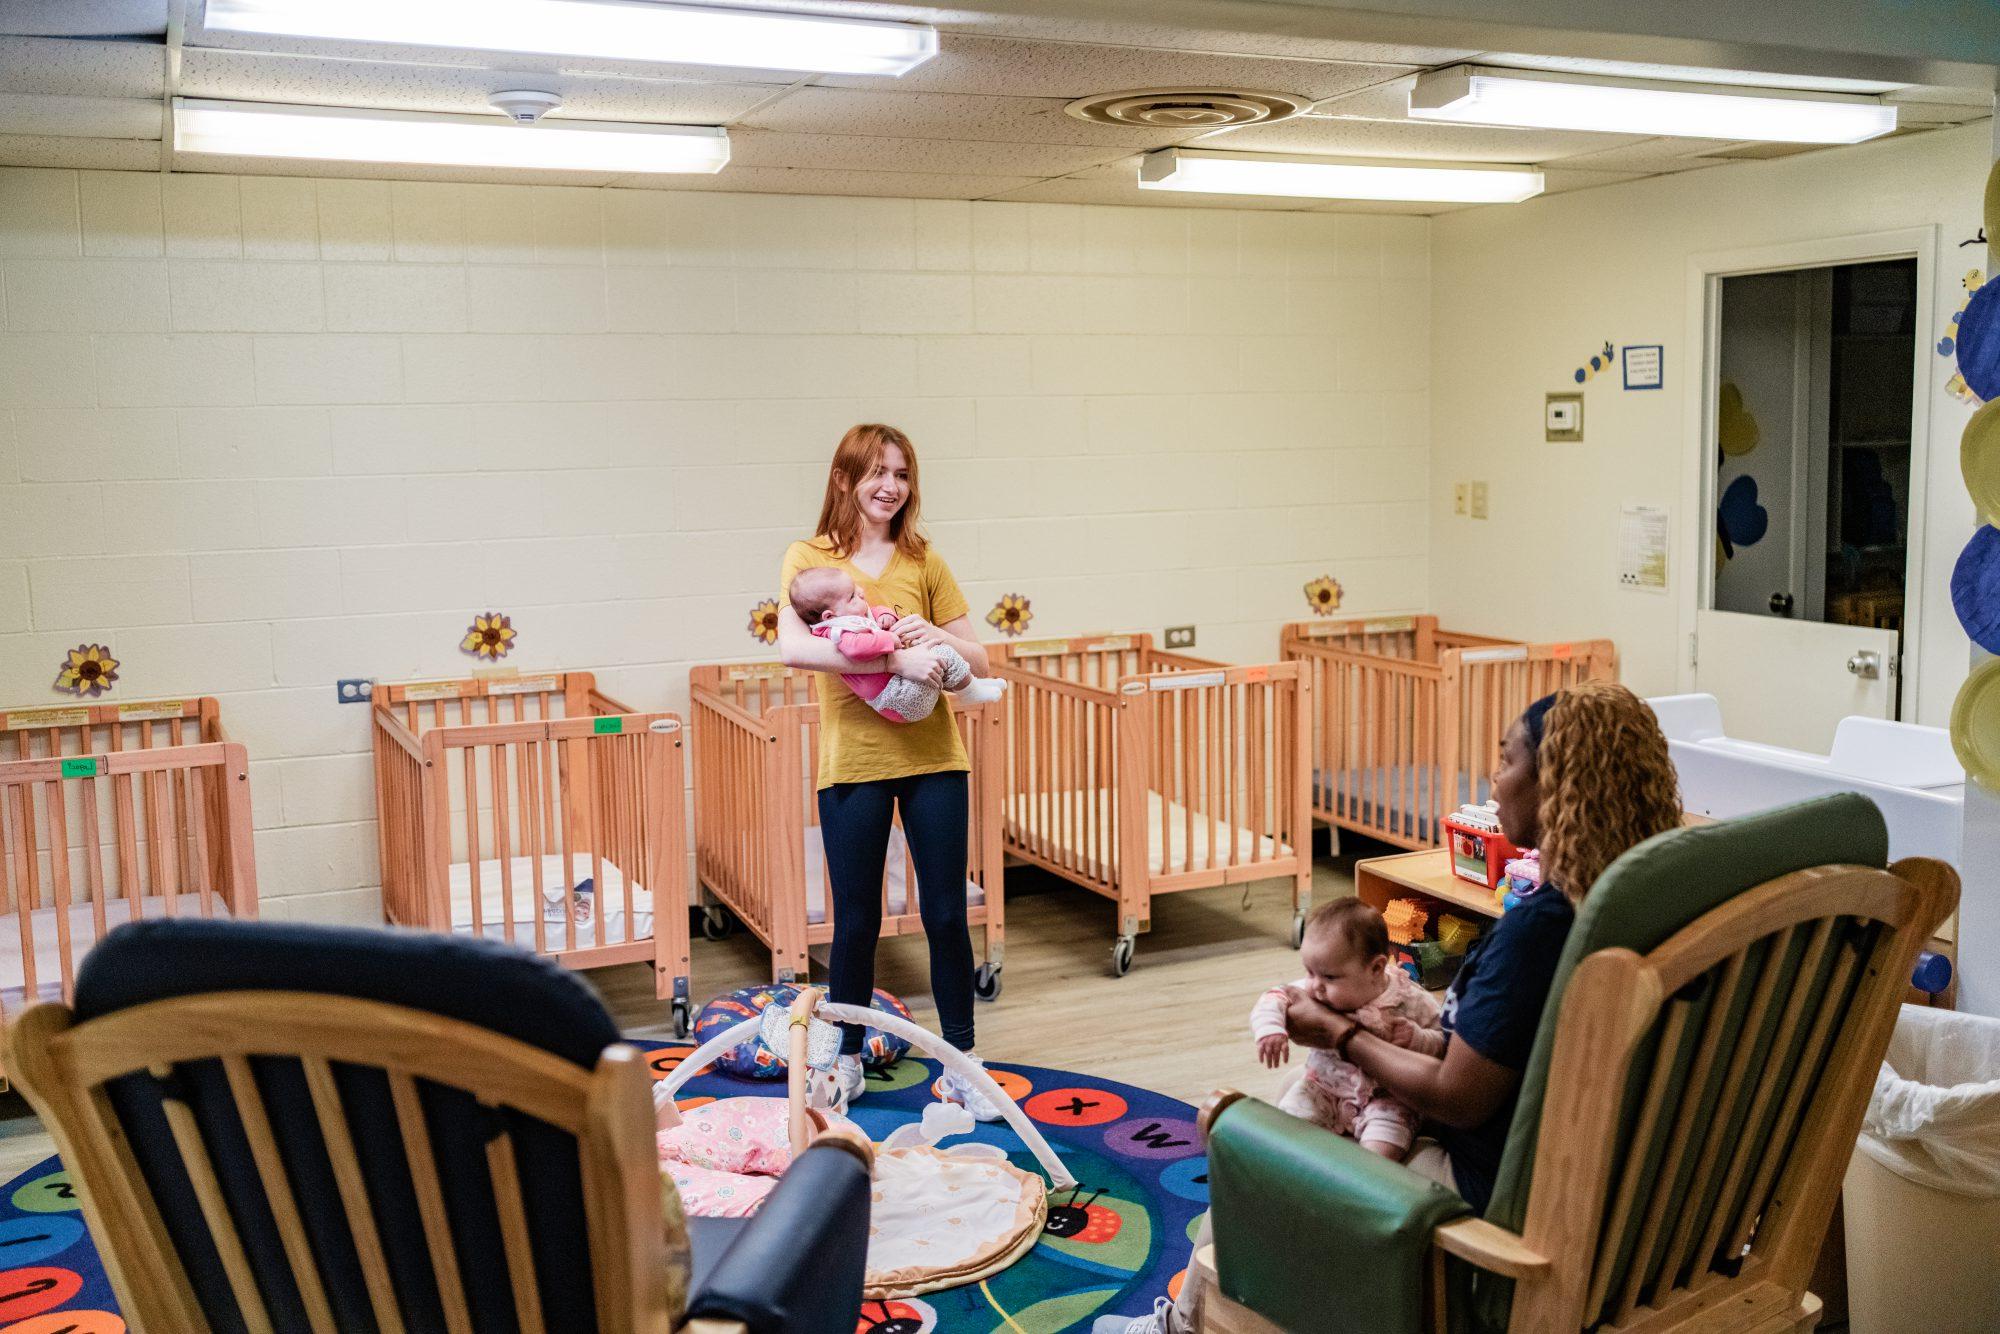 Infant room with two employees holding and playing with infants.